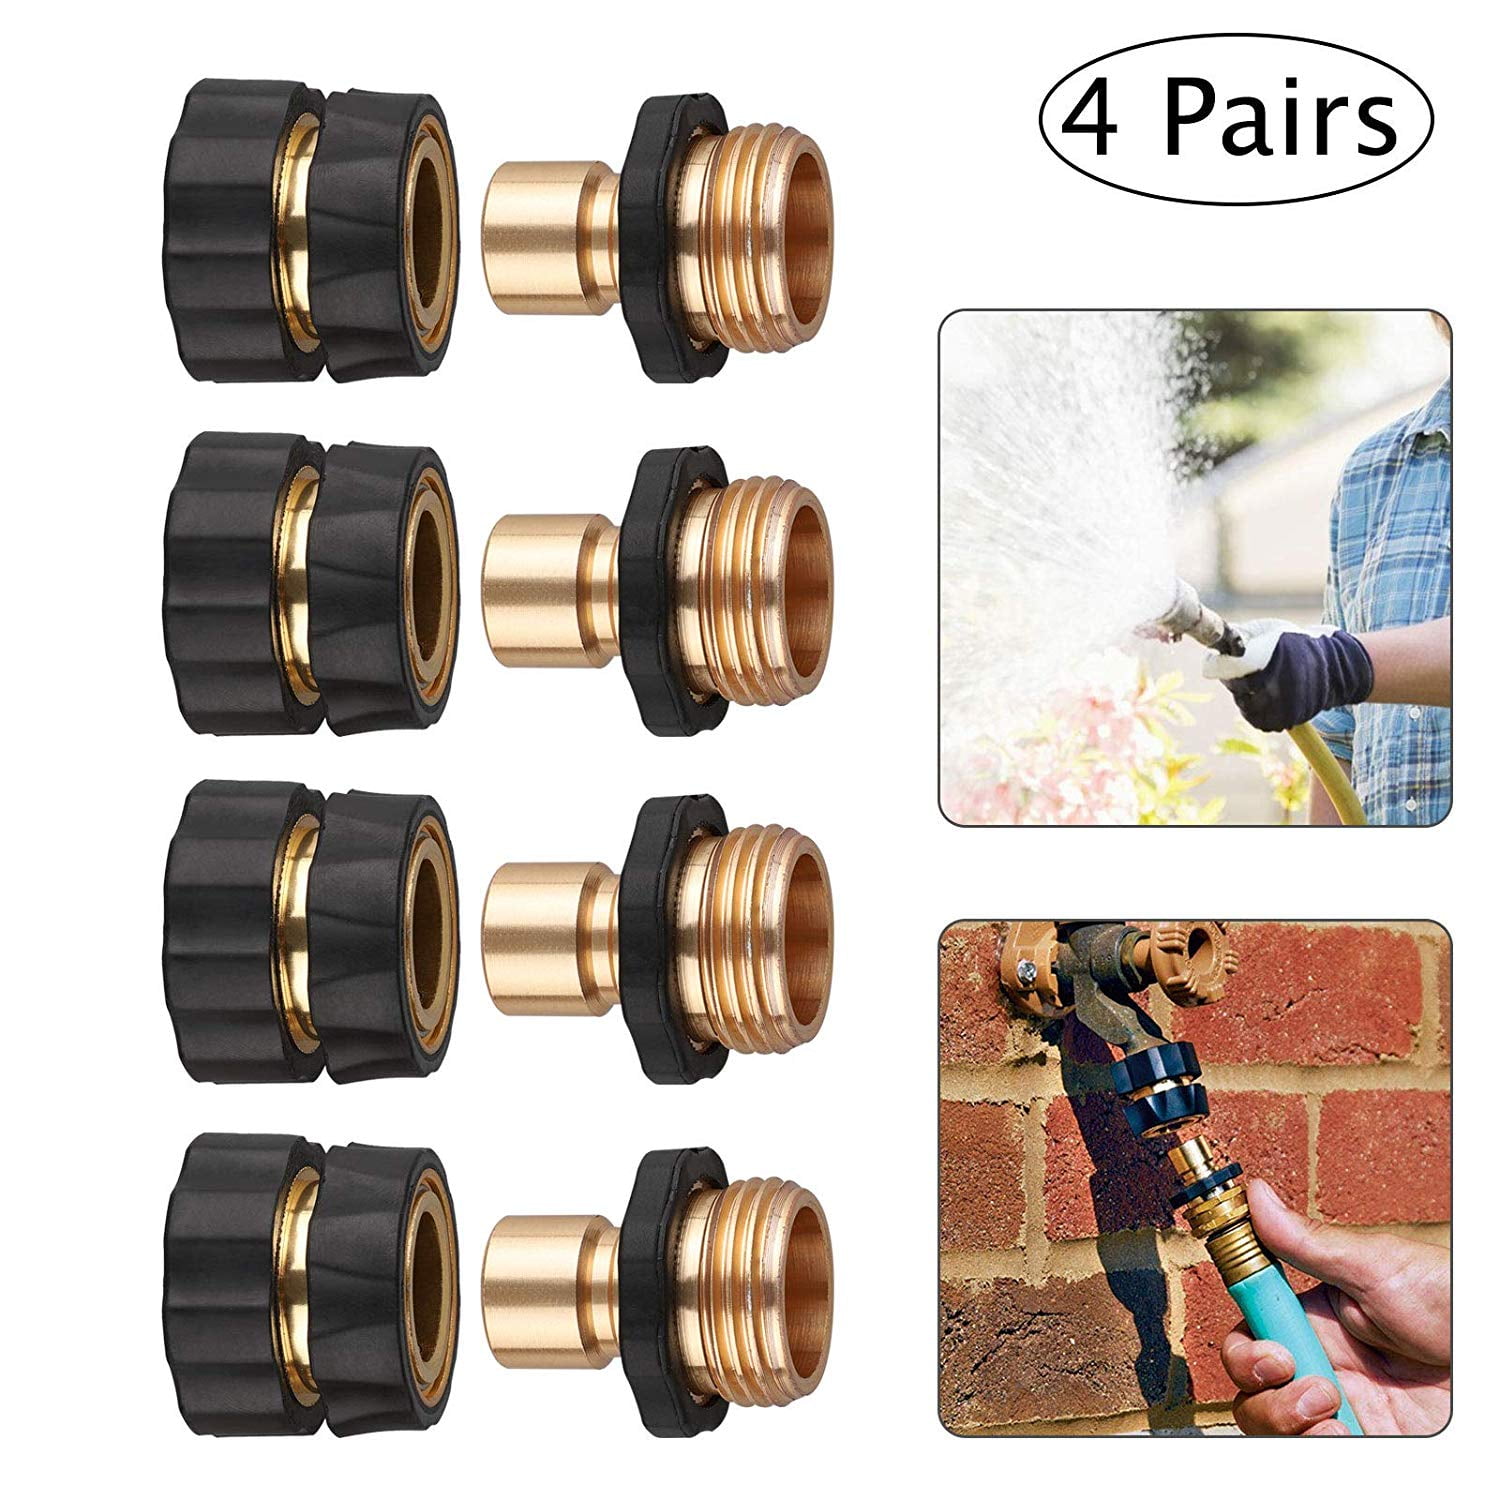 1Set 3/4 Inch Male and Female Universal Garden Hose Fitting Quick Connector 